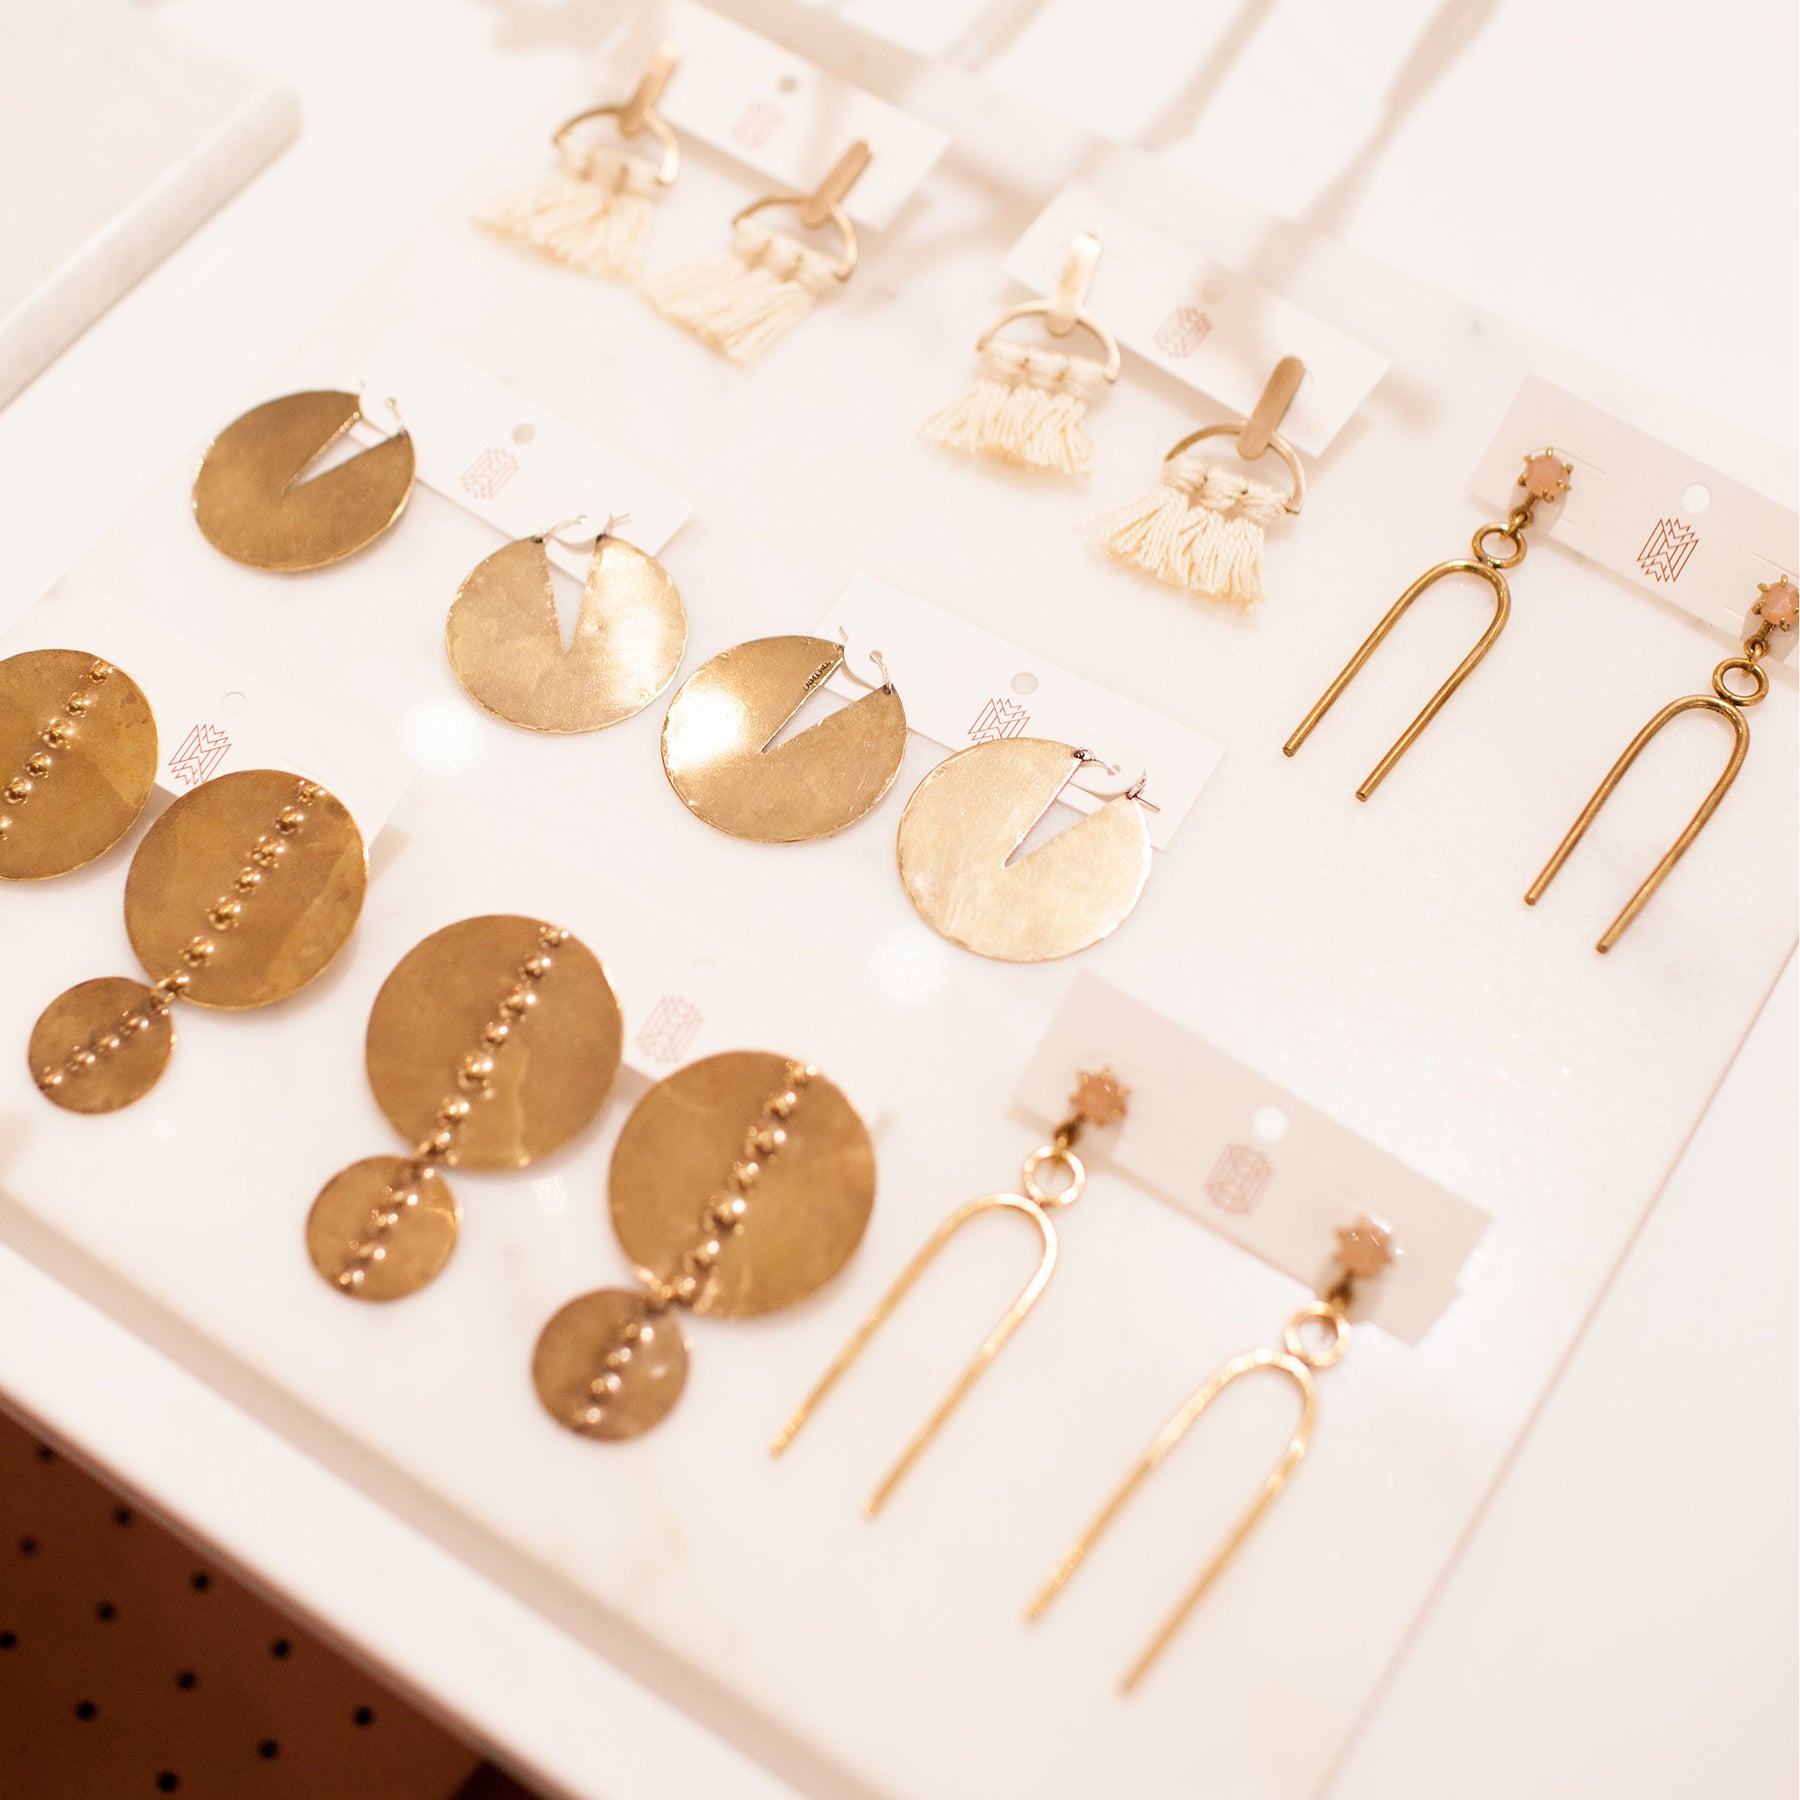 A display of gold-toned earrings